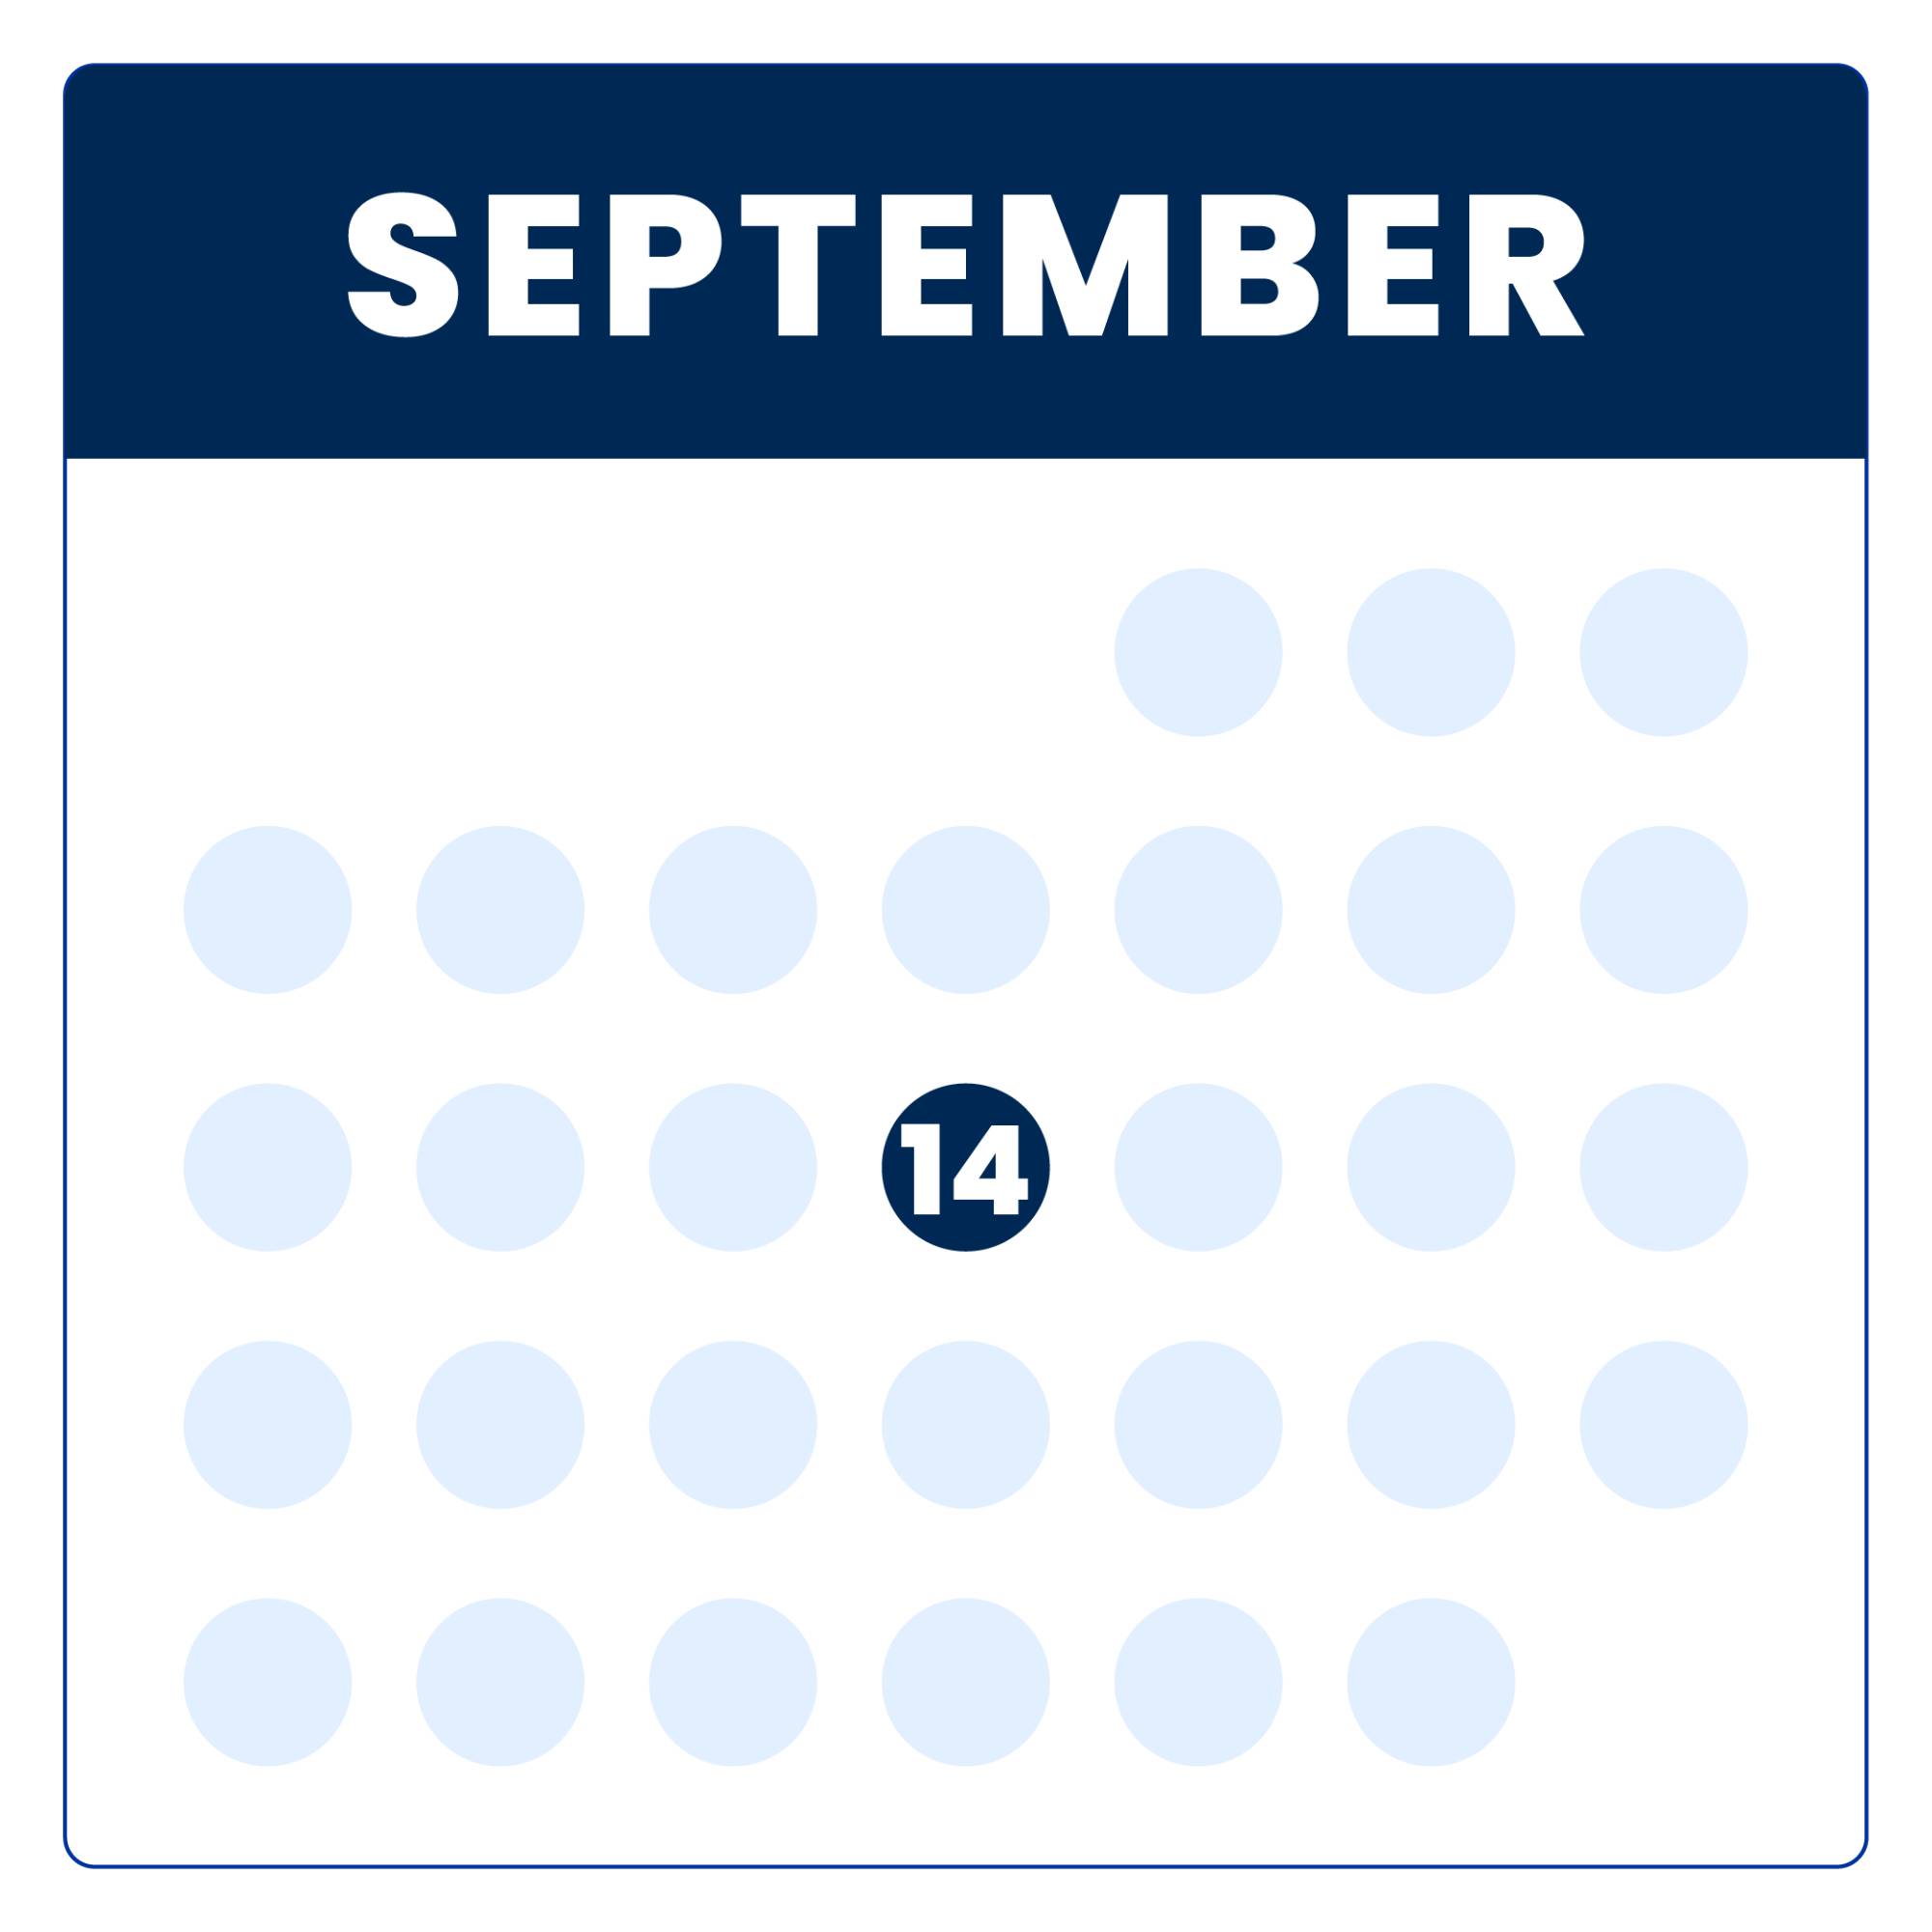 Calendar graphic with September 14, 2022 highlighted